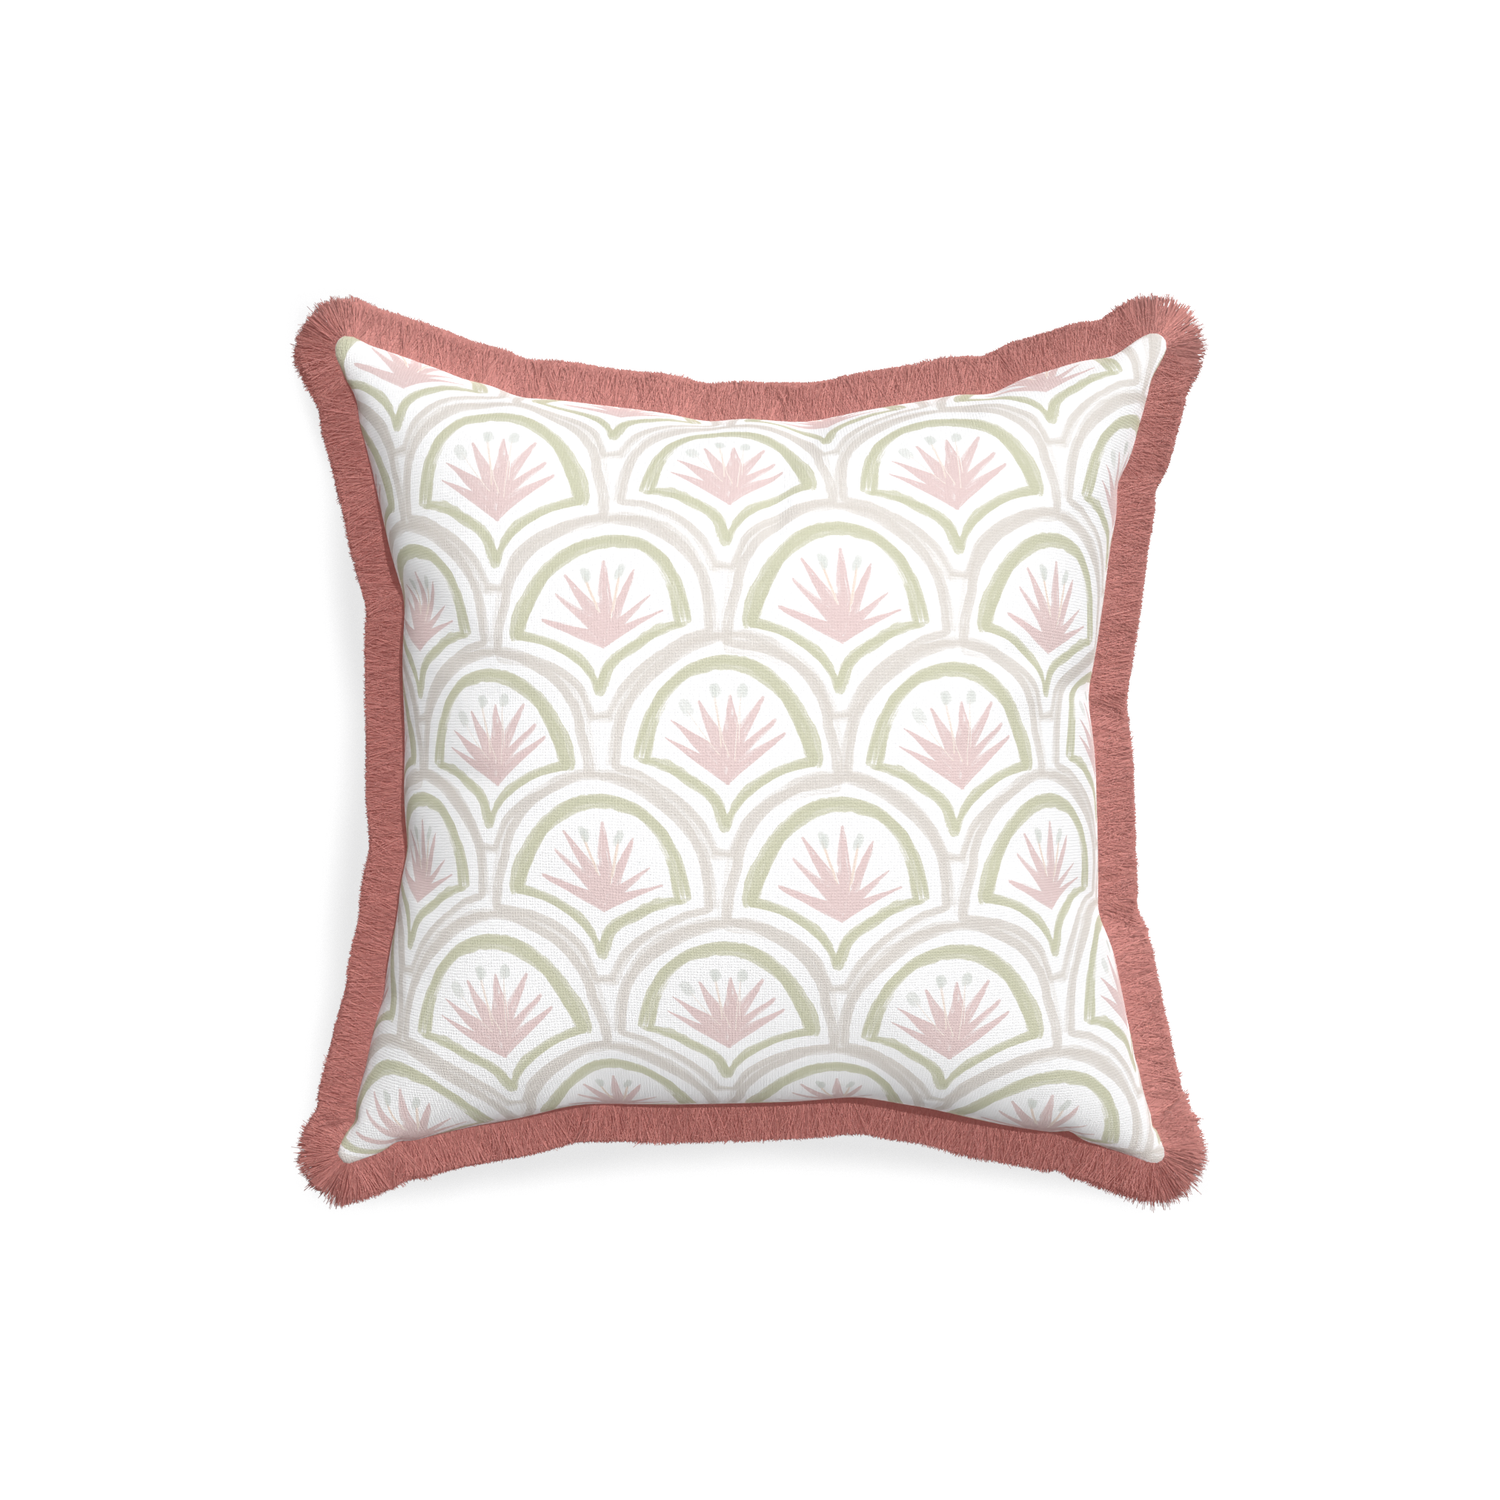 18-square thatcher rose custom pillow with d fringe on white background